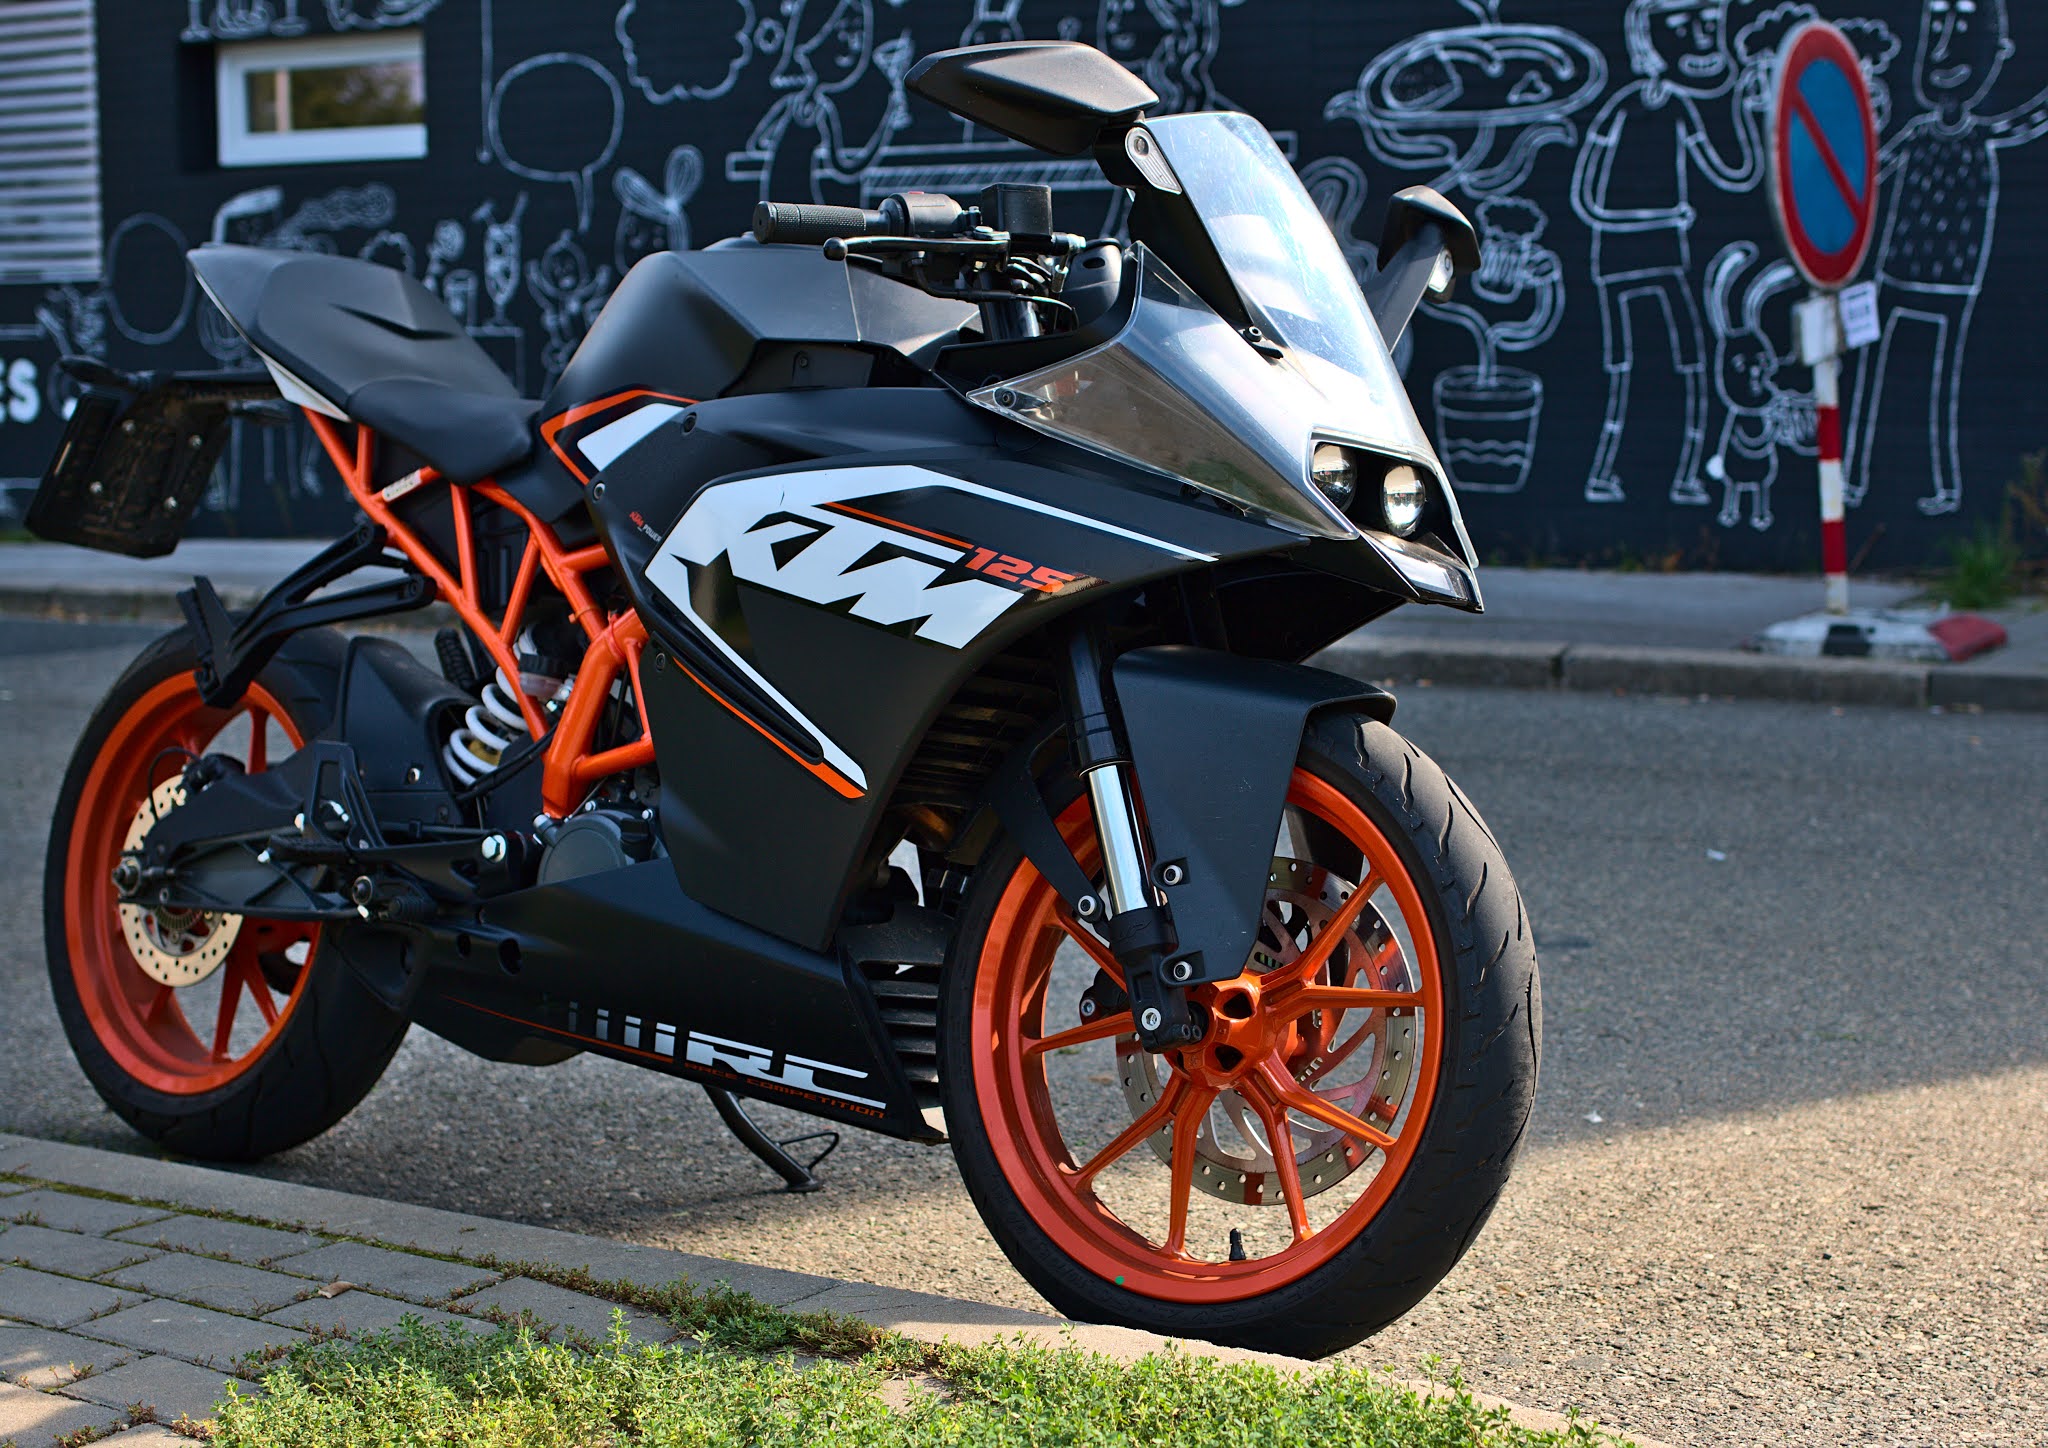 KTM RC 125 Price, Mileage, Specifications, Colors, Top Speed and Servicing Periods